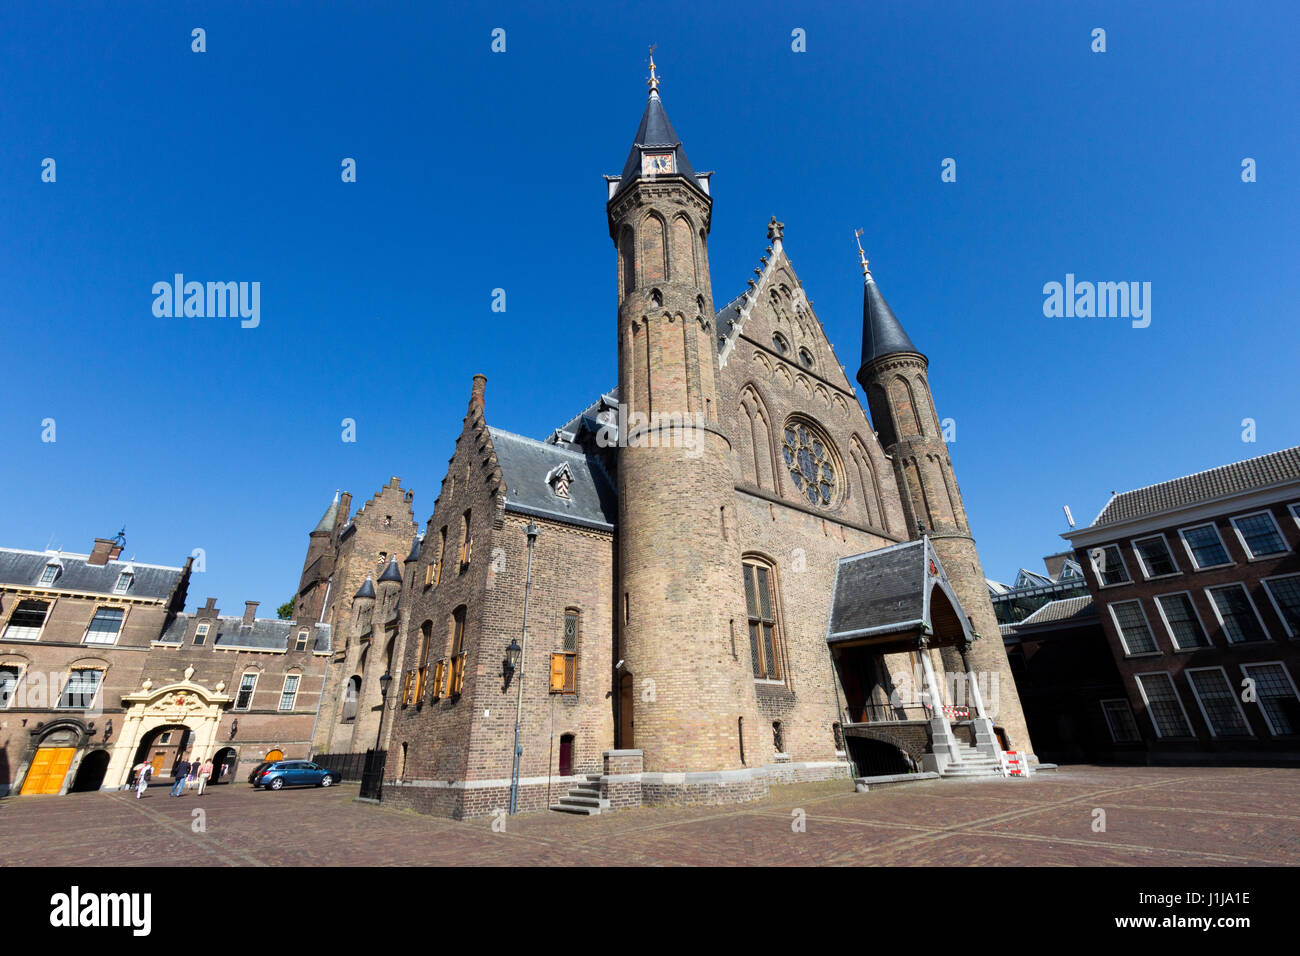 THE HAGUE, THE NETHERLANDS - JUL 18, 2013: Dutch parliament and court building complex Binnenhof in The Hague, The Netherlands Stock Photo